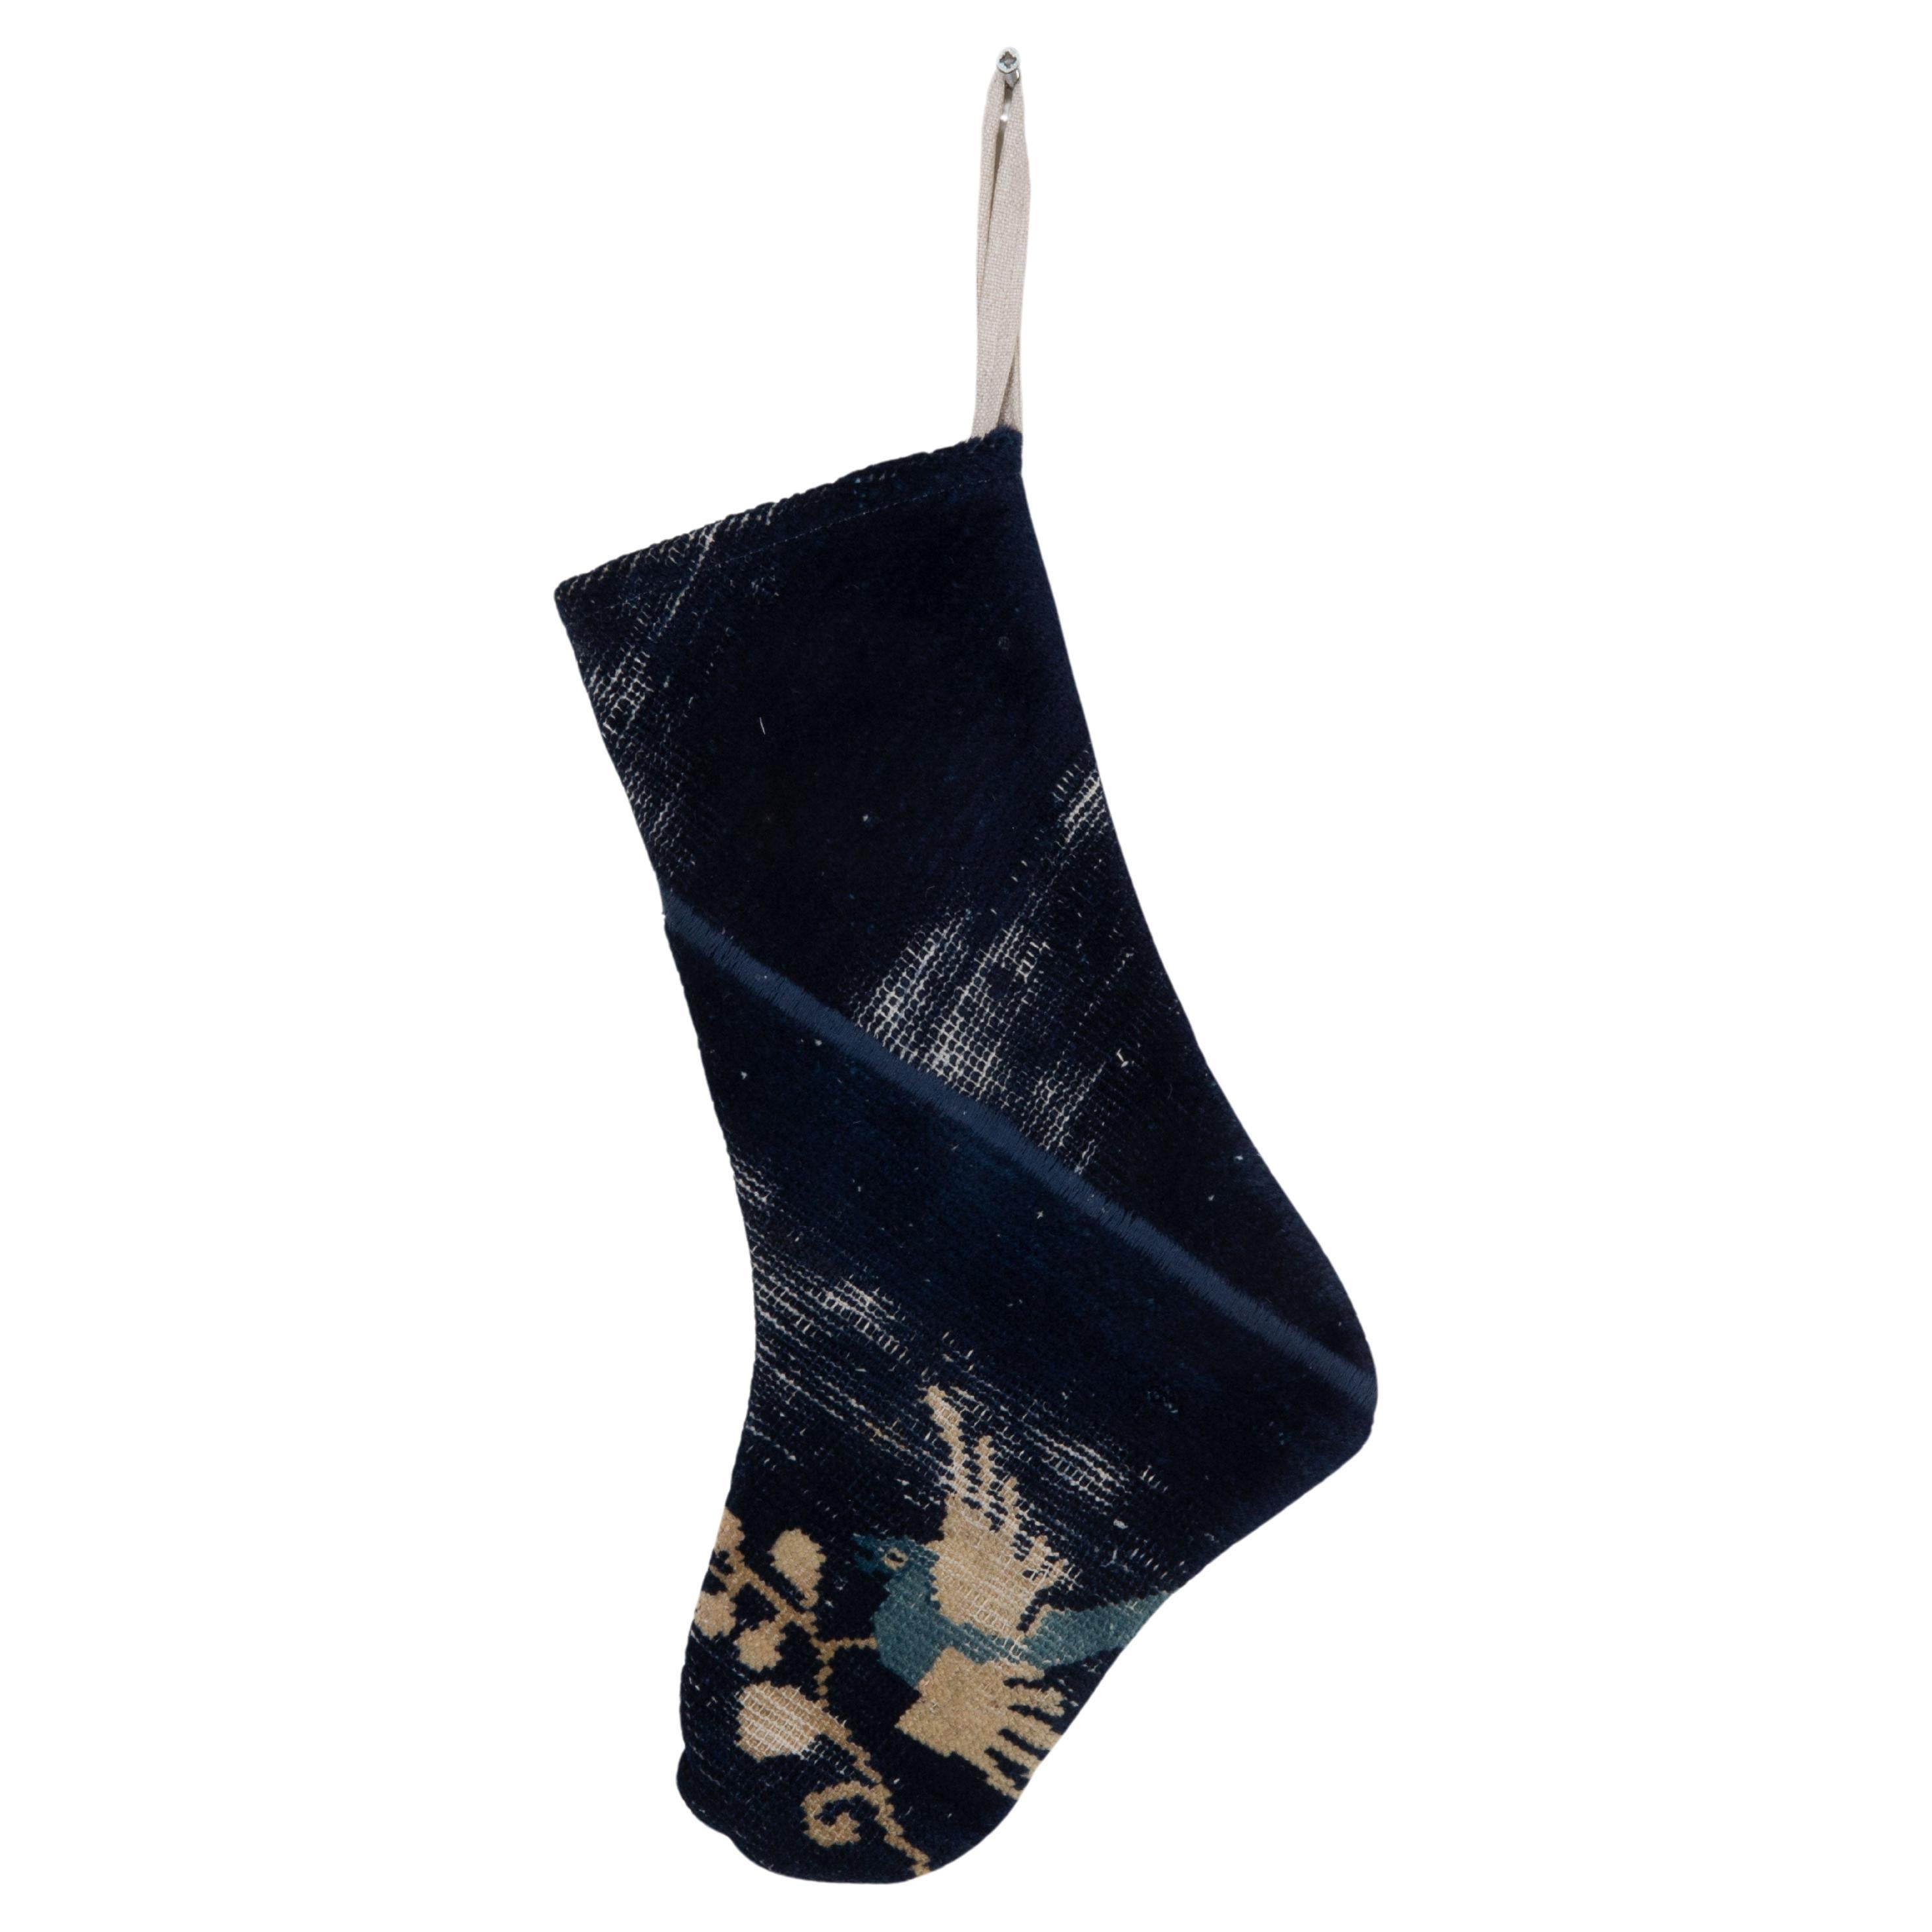 Christmas Stocking Made from Chinese Rug Fragments